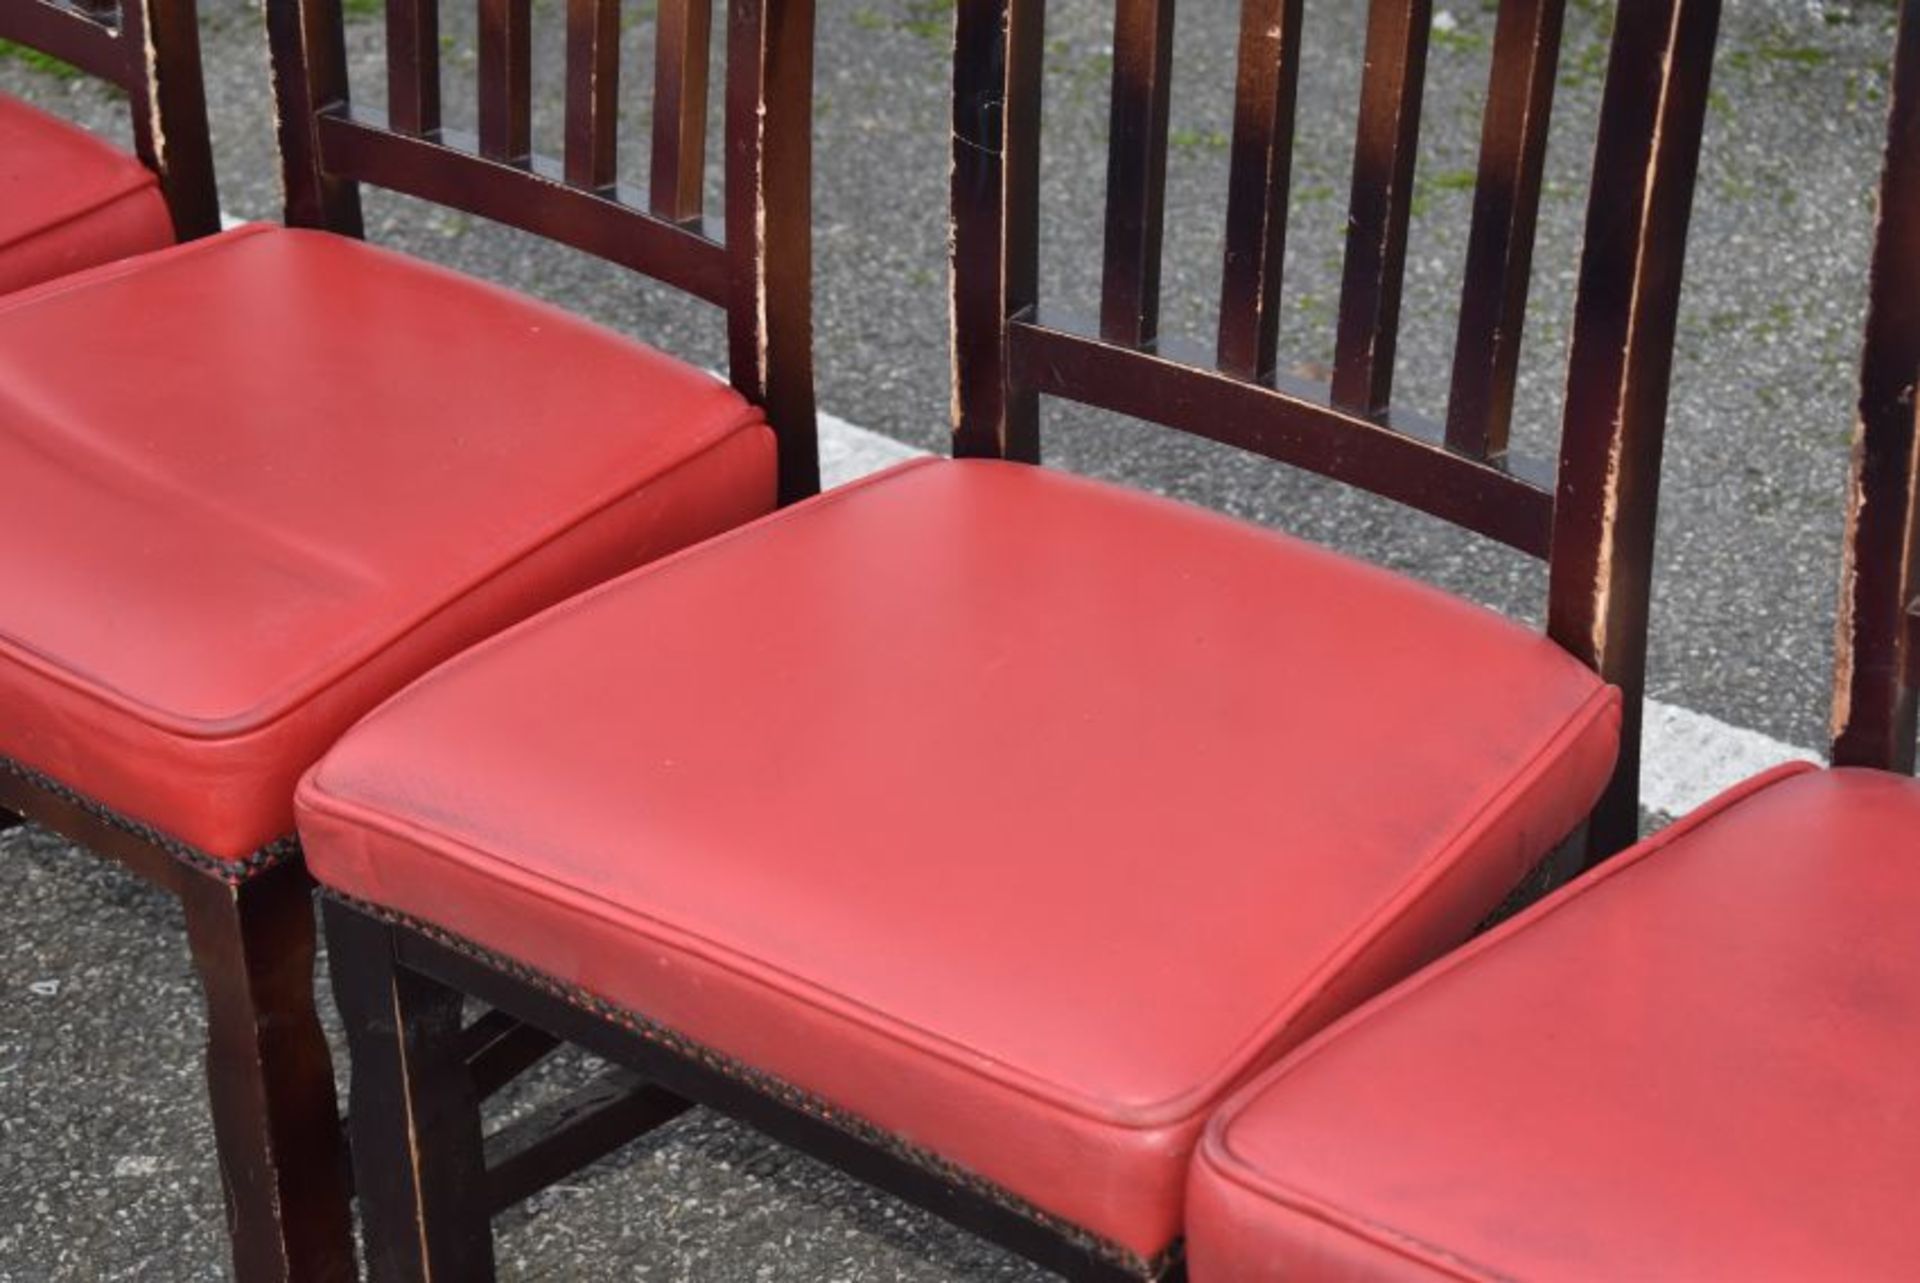 16 x Restaurant Dining Chairs With Dark Stained Wood Finish and Red Leather Seat Pads - Recently - Image 6 of 7